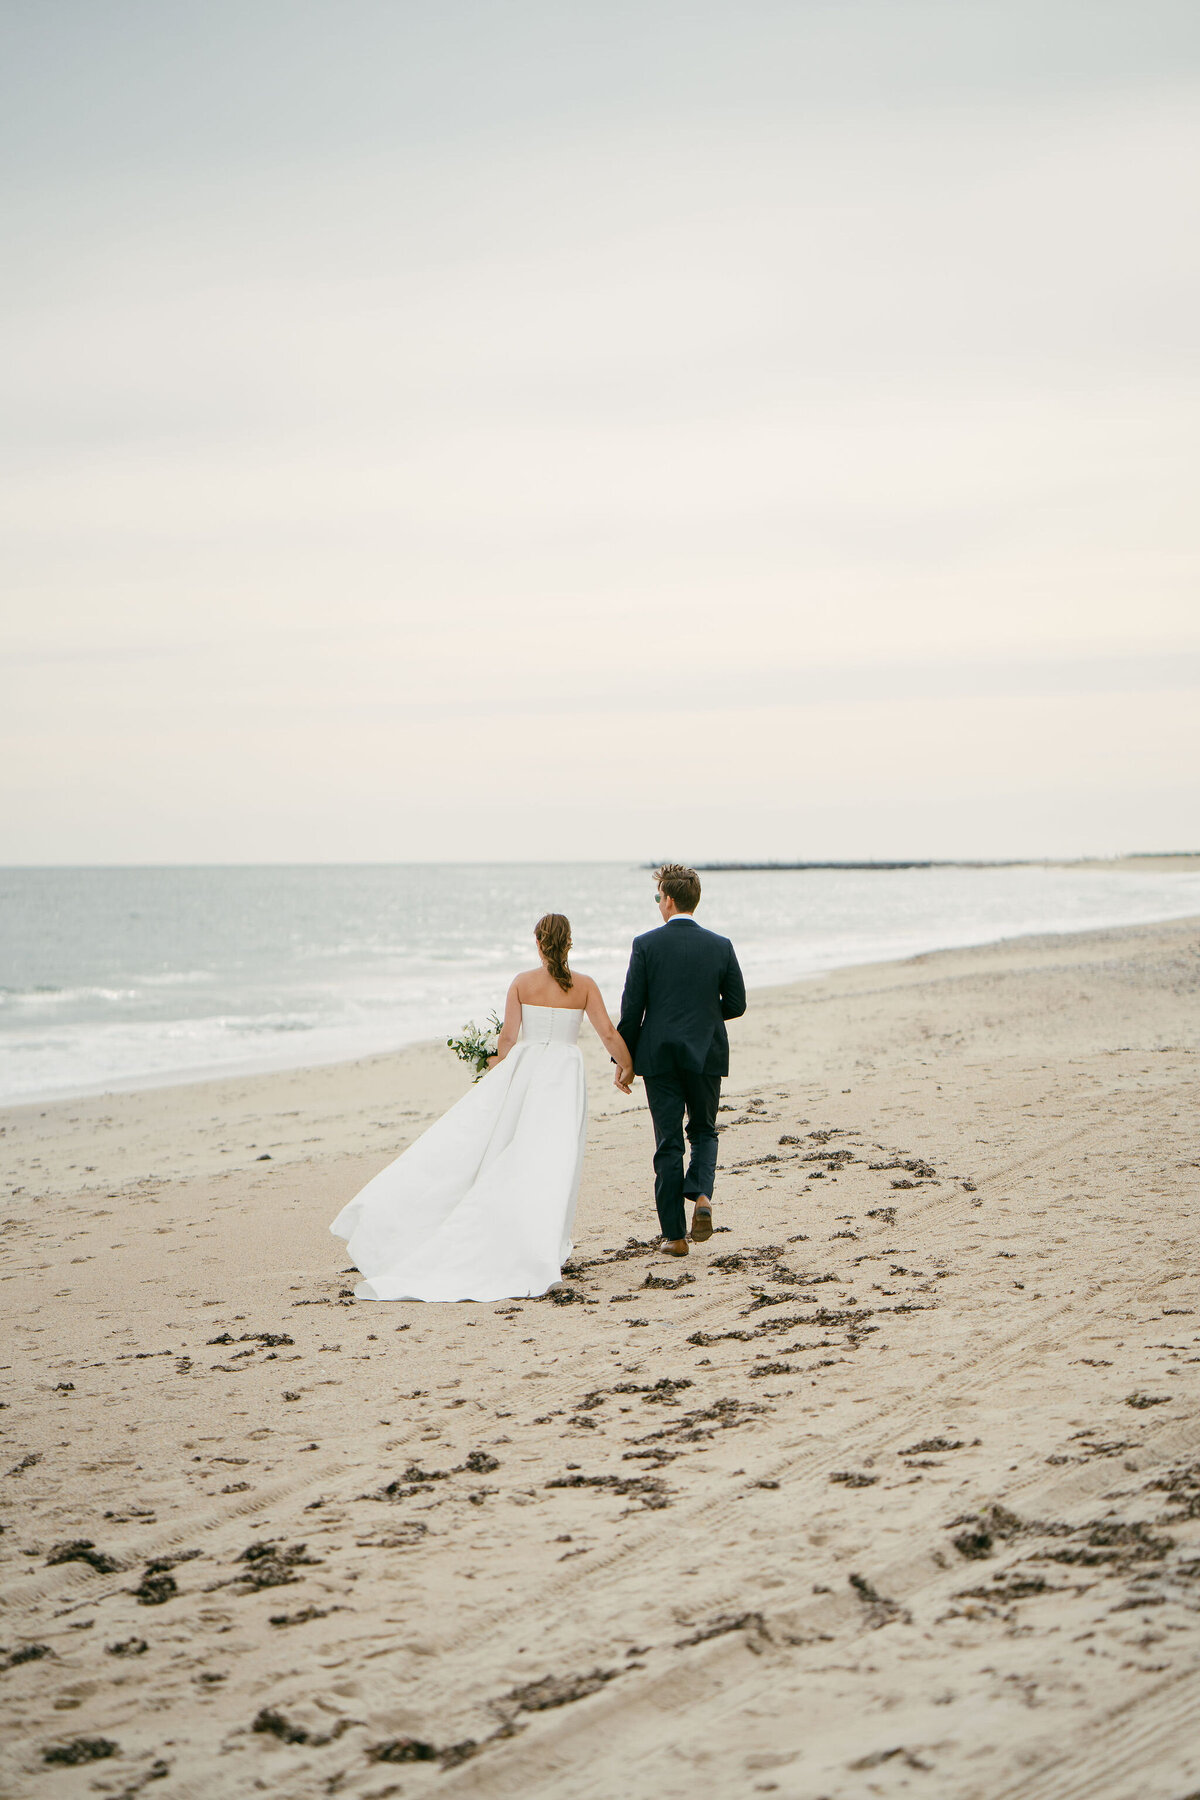 Couple holding hands walking on beach on wedding day, wedding planned by Unique Melody Events & Design (New England Wedding Planners)